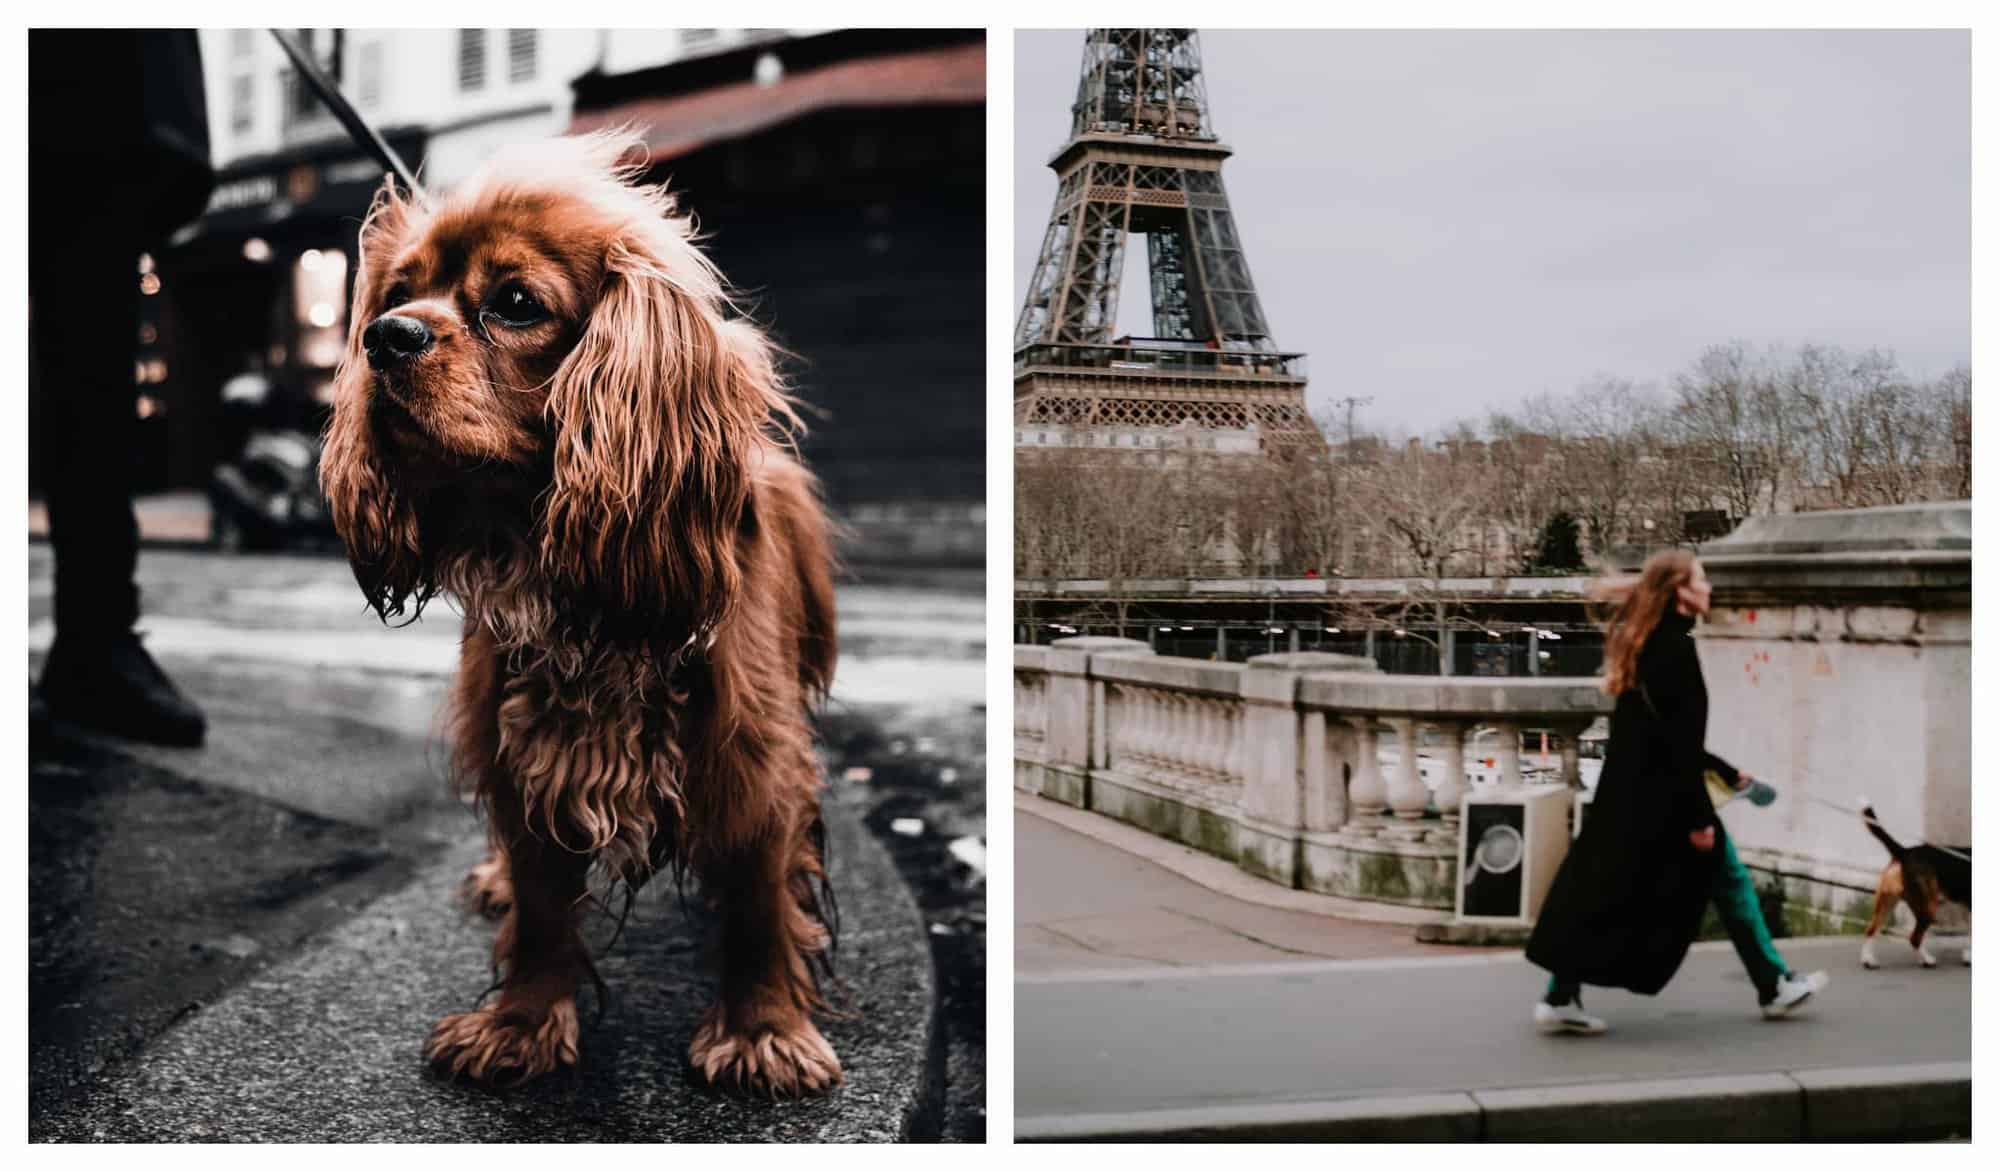 Left: A picture of a brown cocker spaniel in the streets of Paris on a rainy day, on a walk with its owner. Right: A woman walks her dog, which is just out of frame, nearby the Eiffel Tower on a cloudy day.